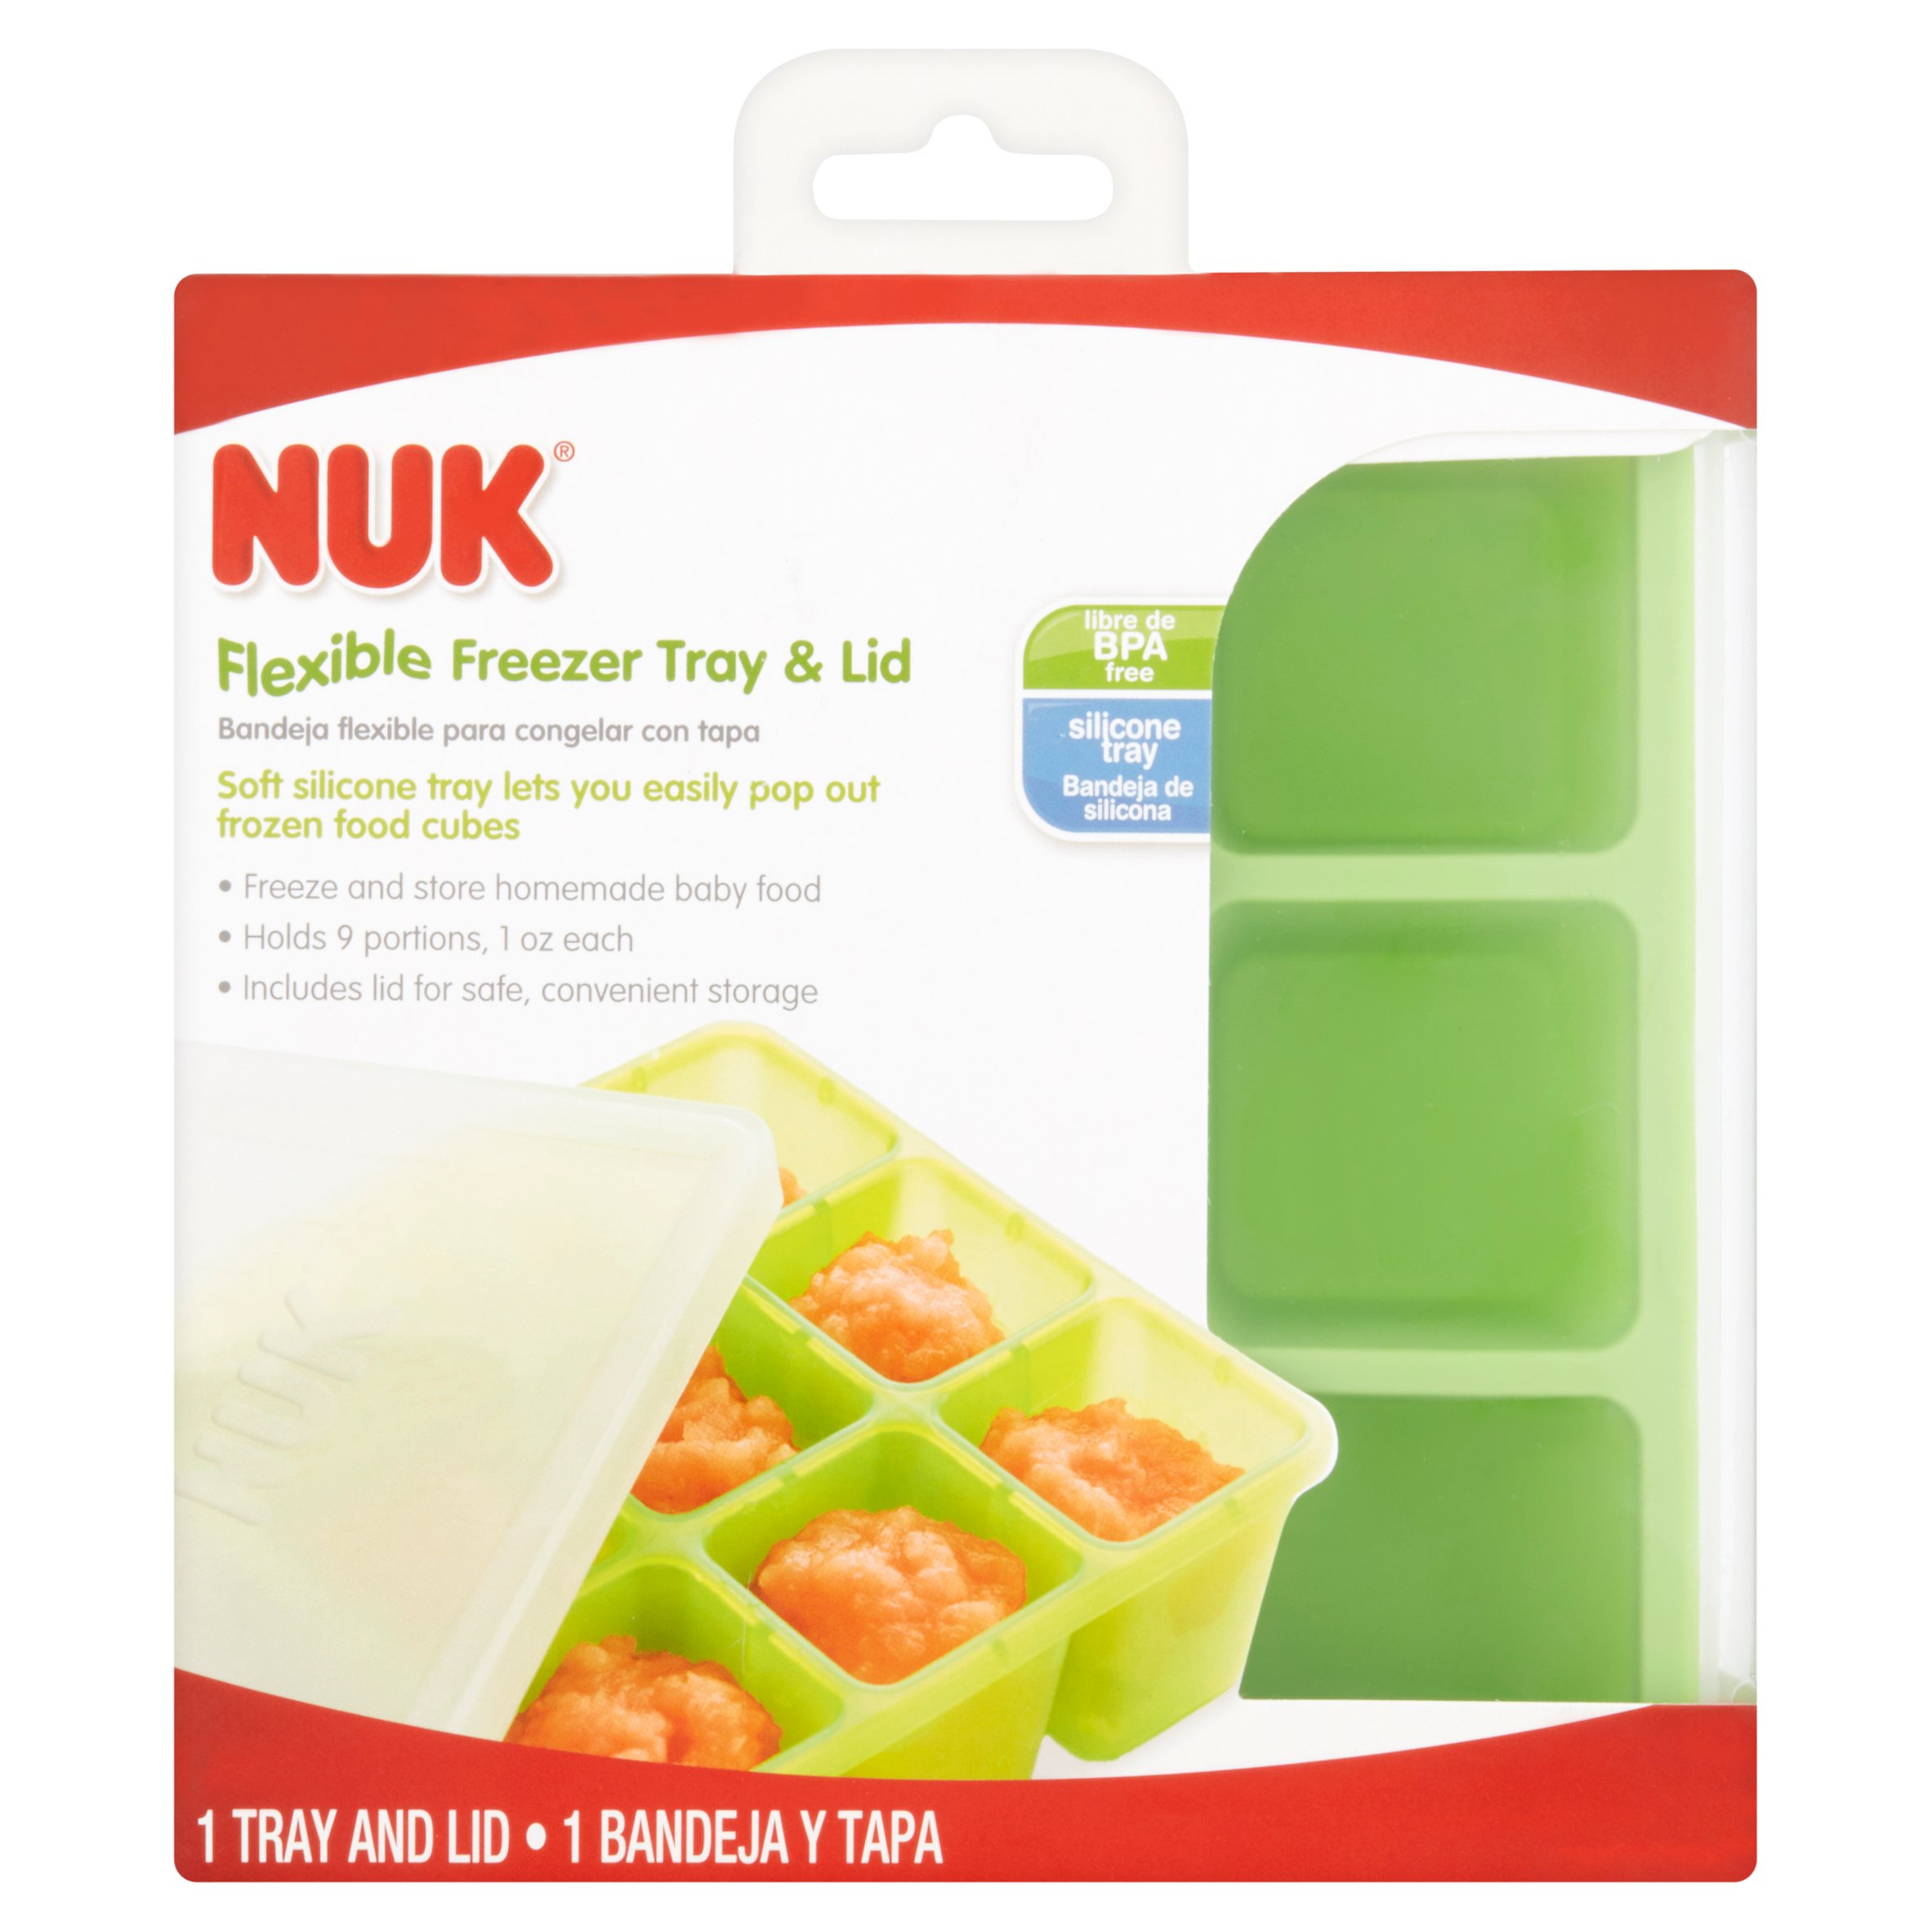 NUK Silicone Baby Food Freezer Tray, Green - image 5 of 6